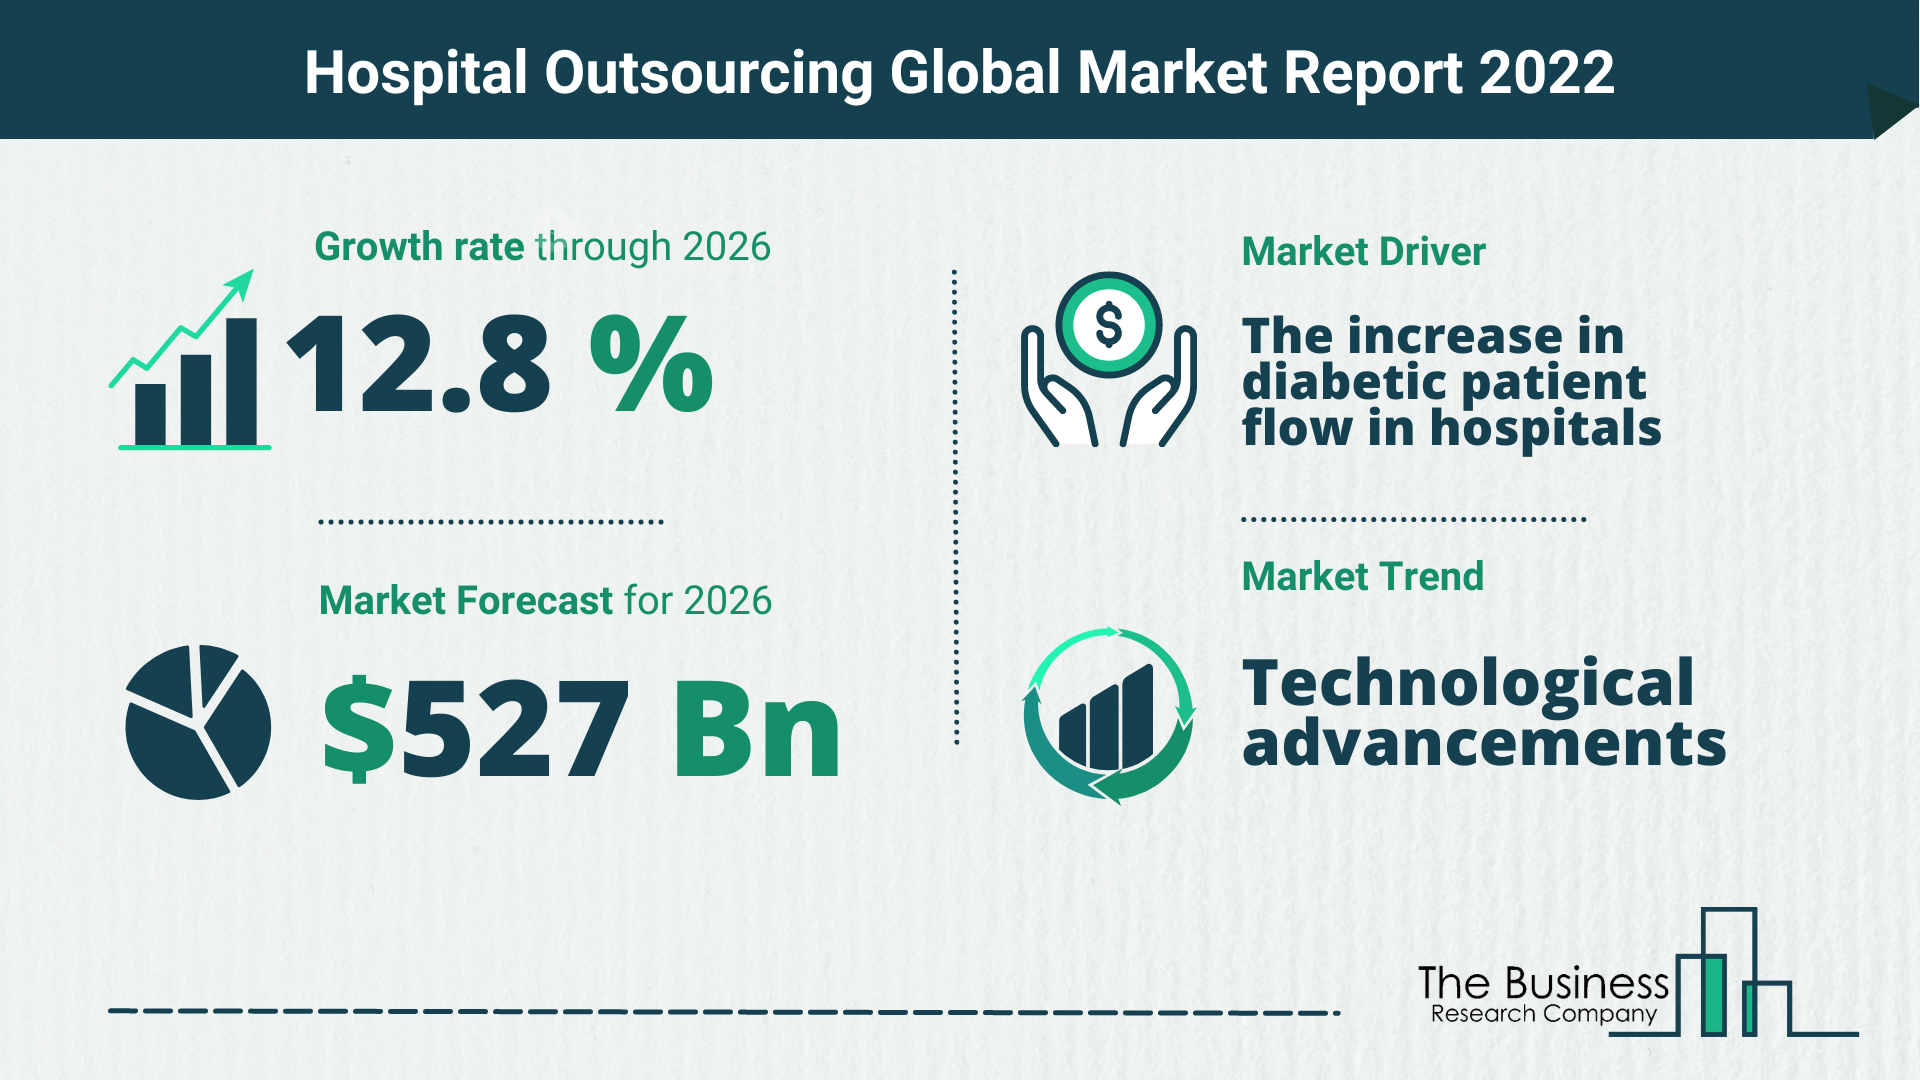 What Is The Hospital Outsourcing Market Overview In 2022?